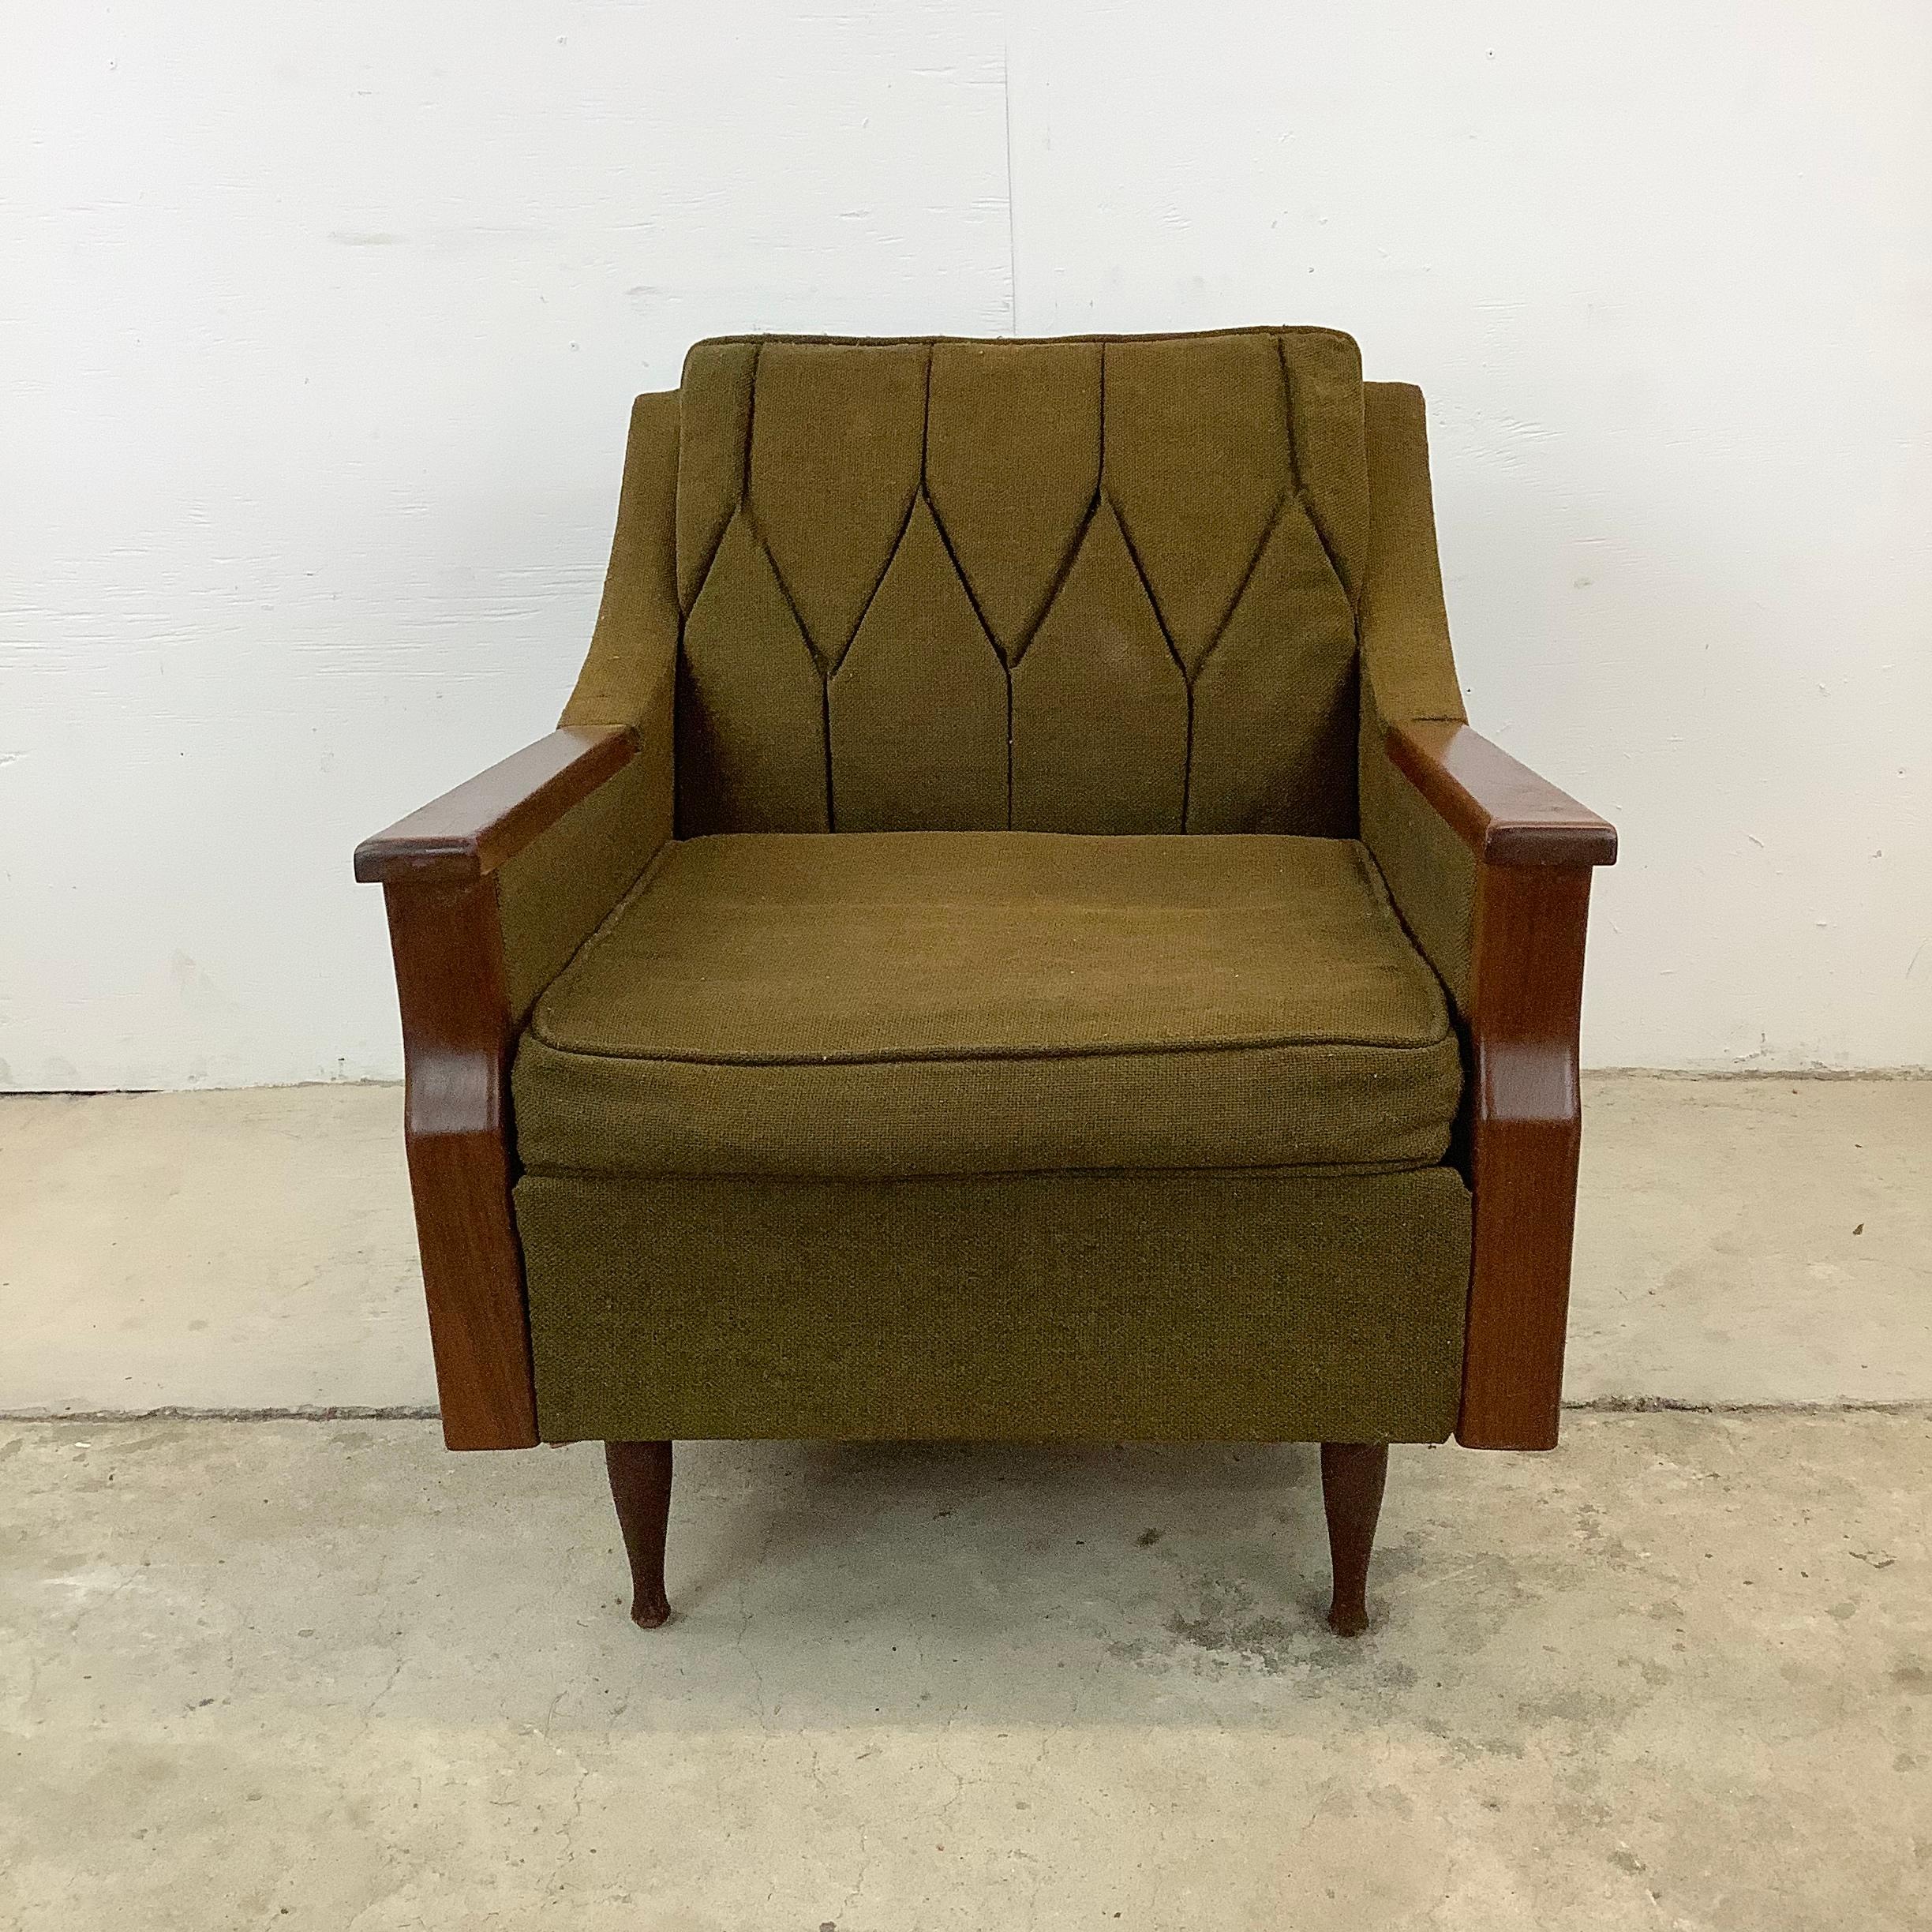 Discover the quintessential charm of mid-century modern design with this exquisite lounge chair, inviting you to sit back and relax in vintage elegance.

The chair is upholstered in vintage olive tweed fabric, which is believed to be the original